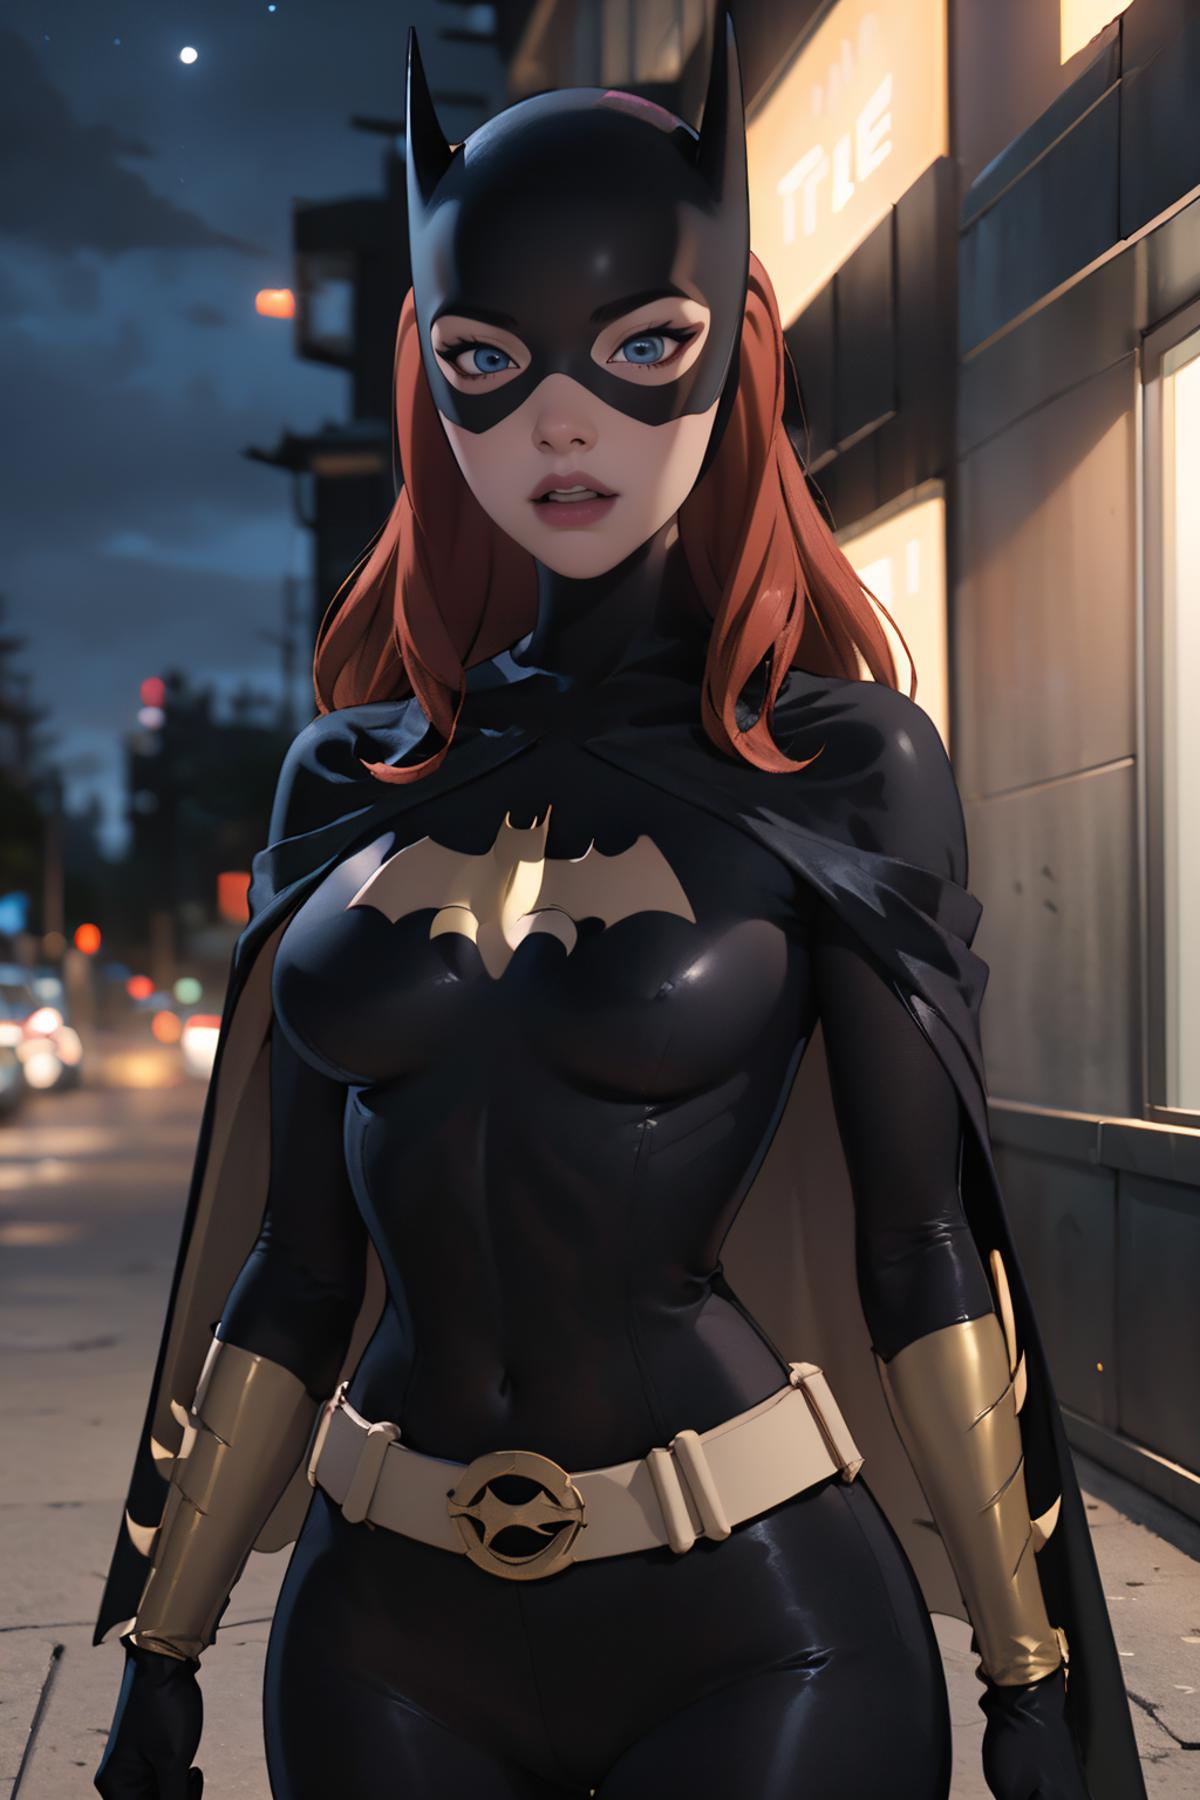 A computer-generated image of a woman in a black and gold Batgirl costume.